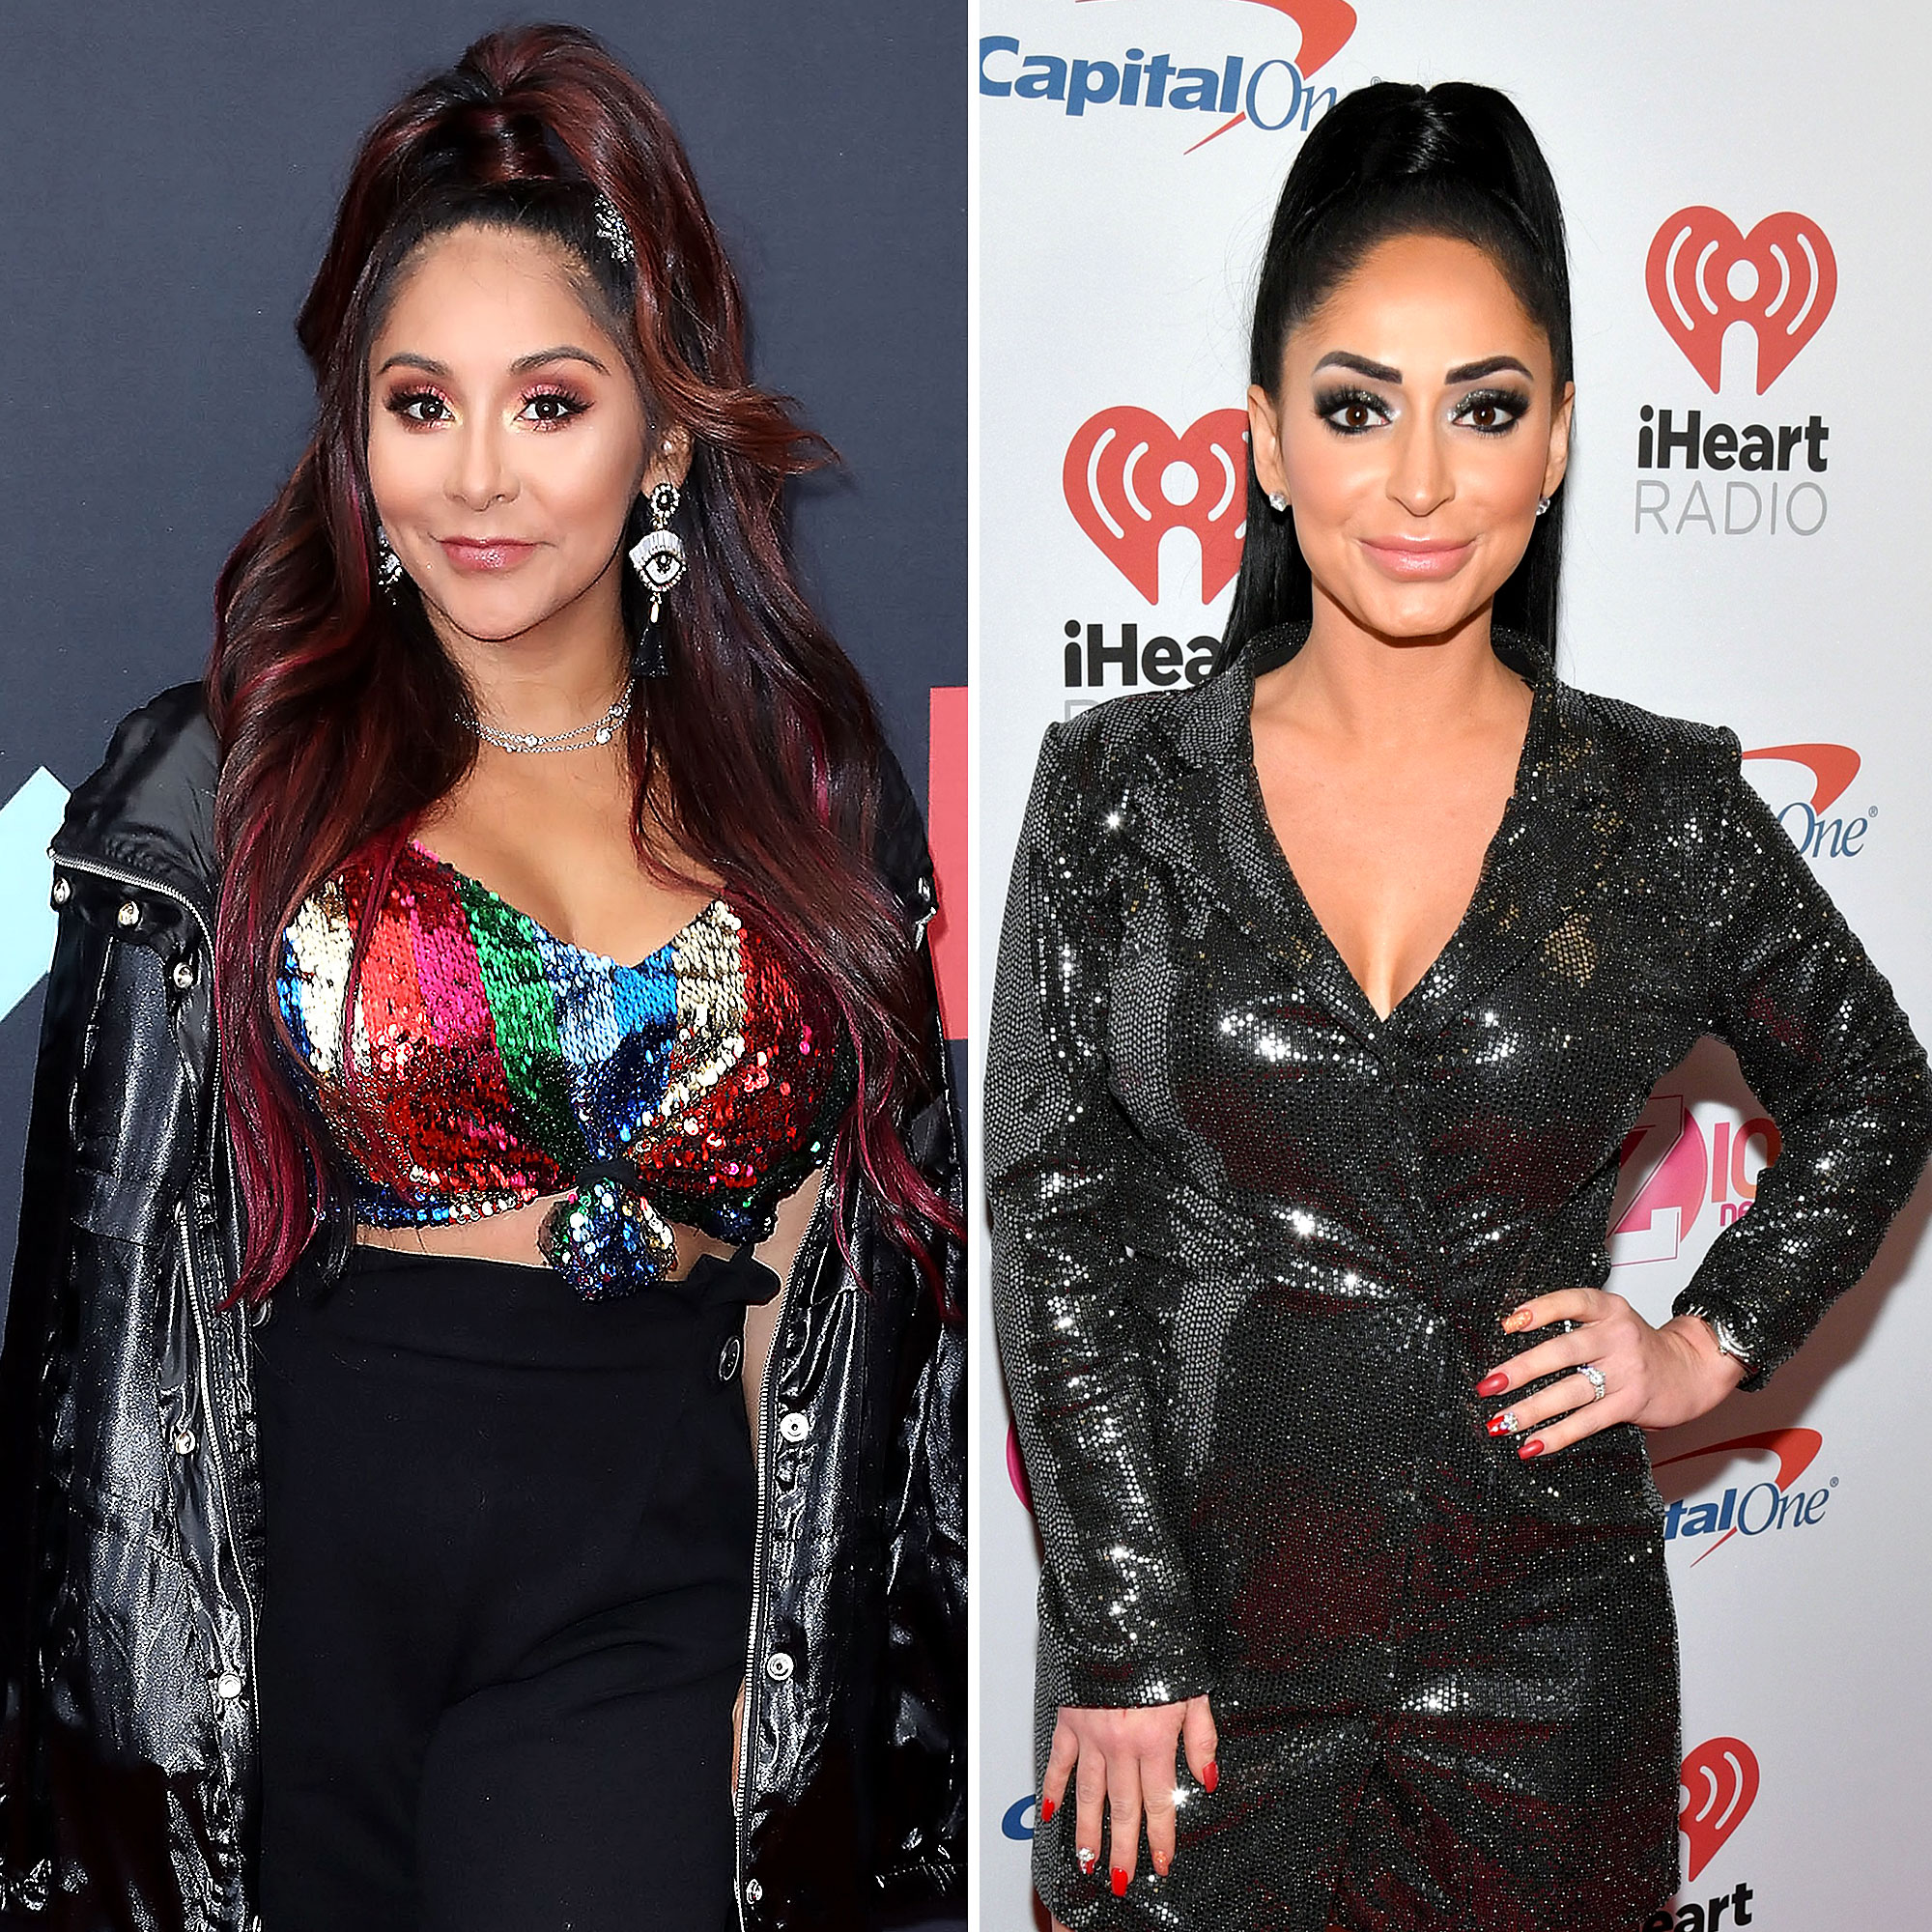 Jersey Shore': Nicole 'Snooki' Polizzi's Favorite Moments From the